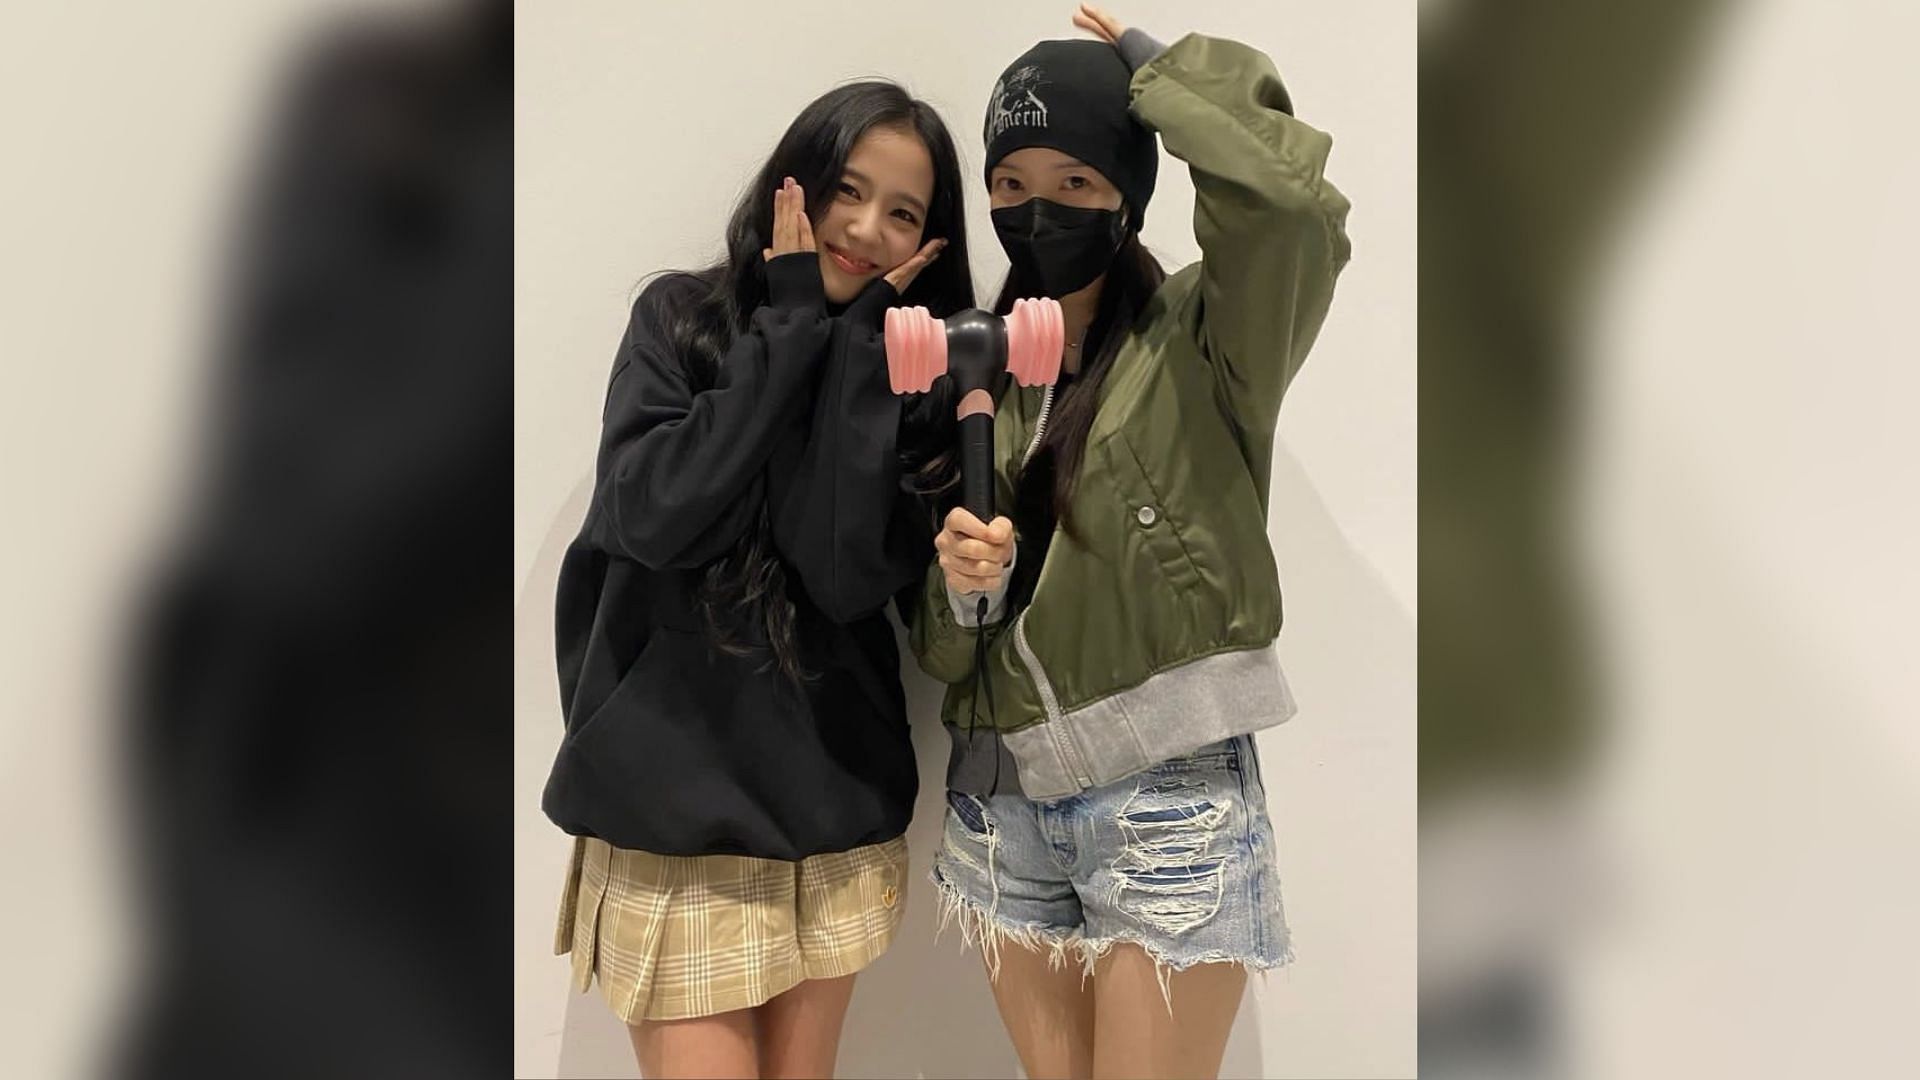 Snowdrop actress Yoon Se-ah clicked a picture with Jisoo backstage at the Born Pink concert (Image via Instagram/loveyoonsea)